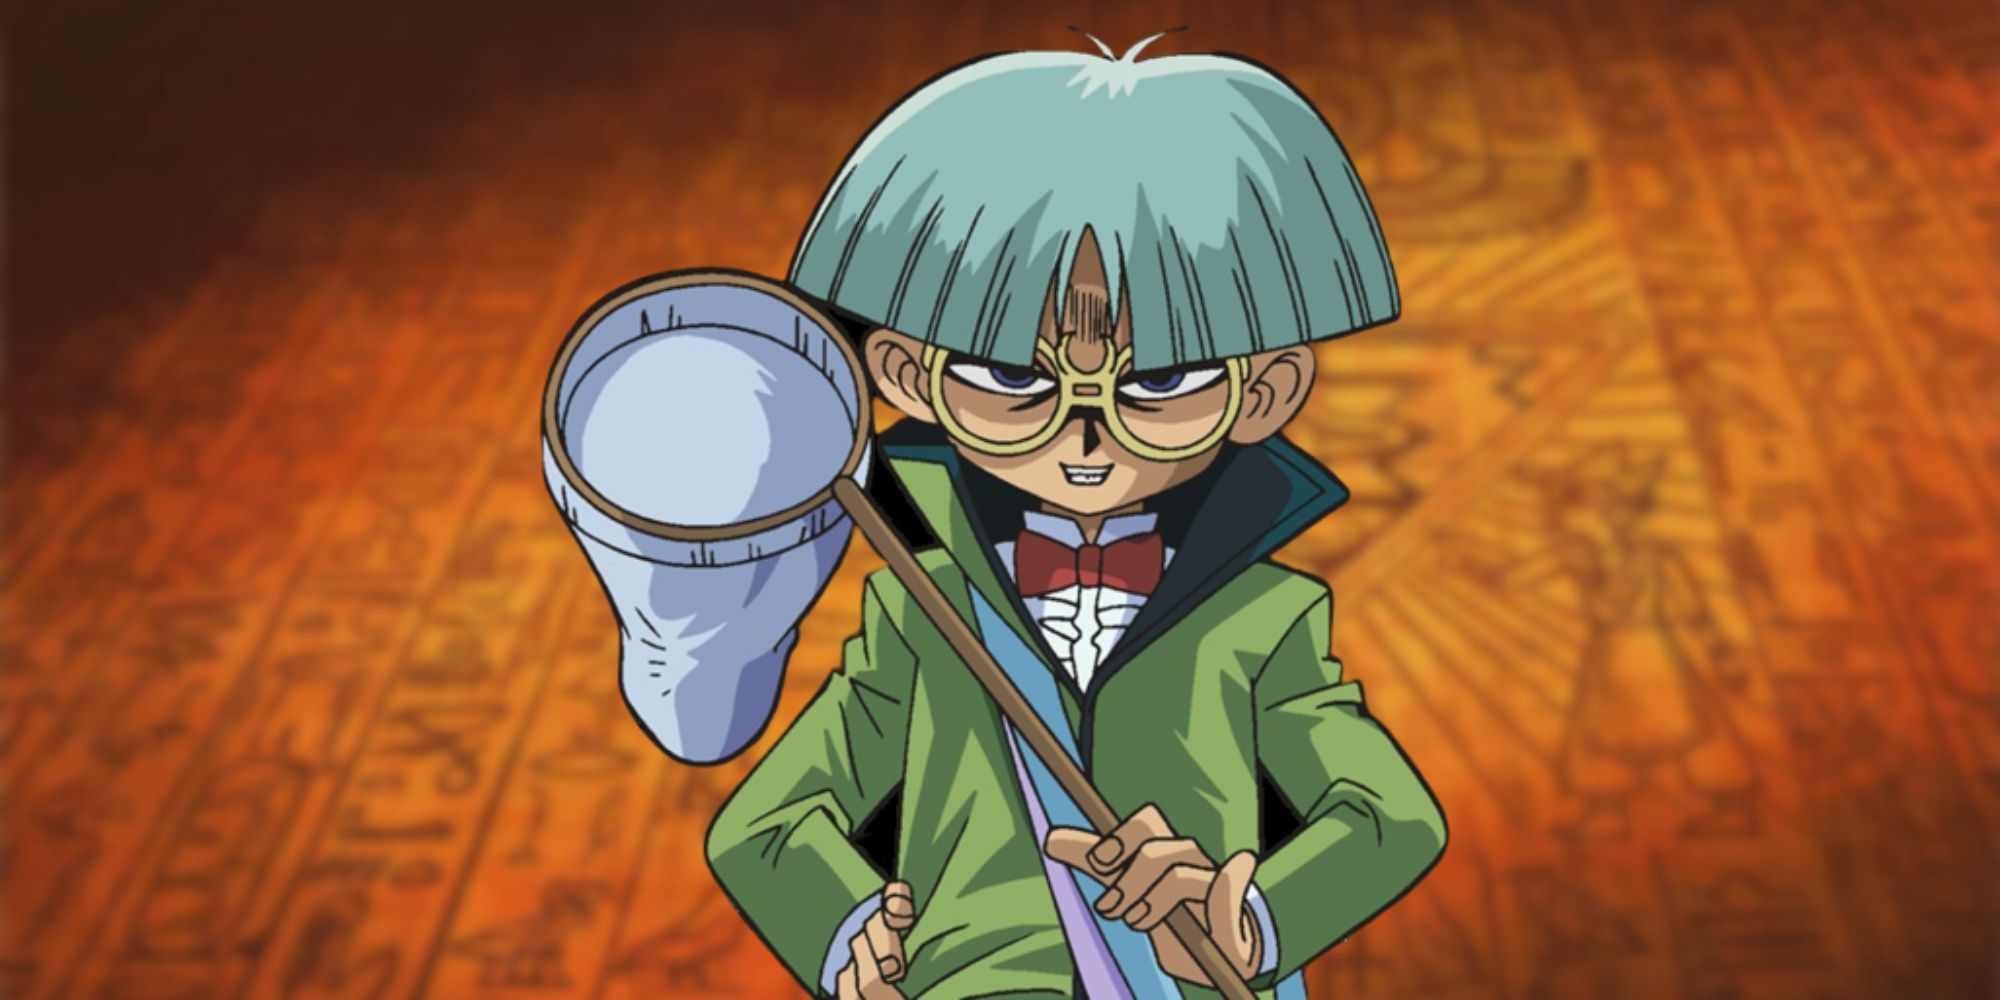 Yu-Gi-Oh! Character: Weevil Underwood on a Yu-Gi-Oh Tablet Backdrop